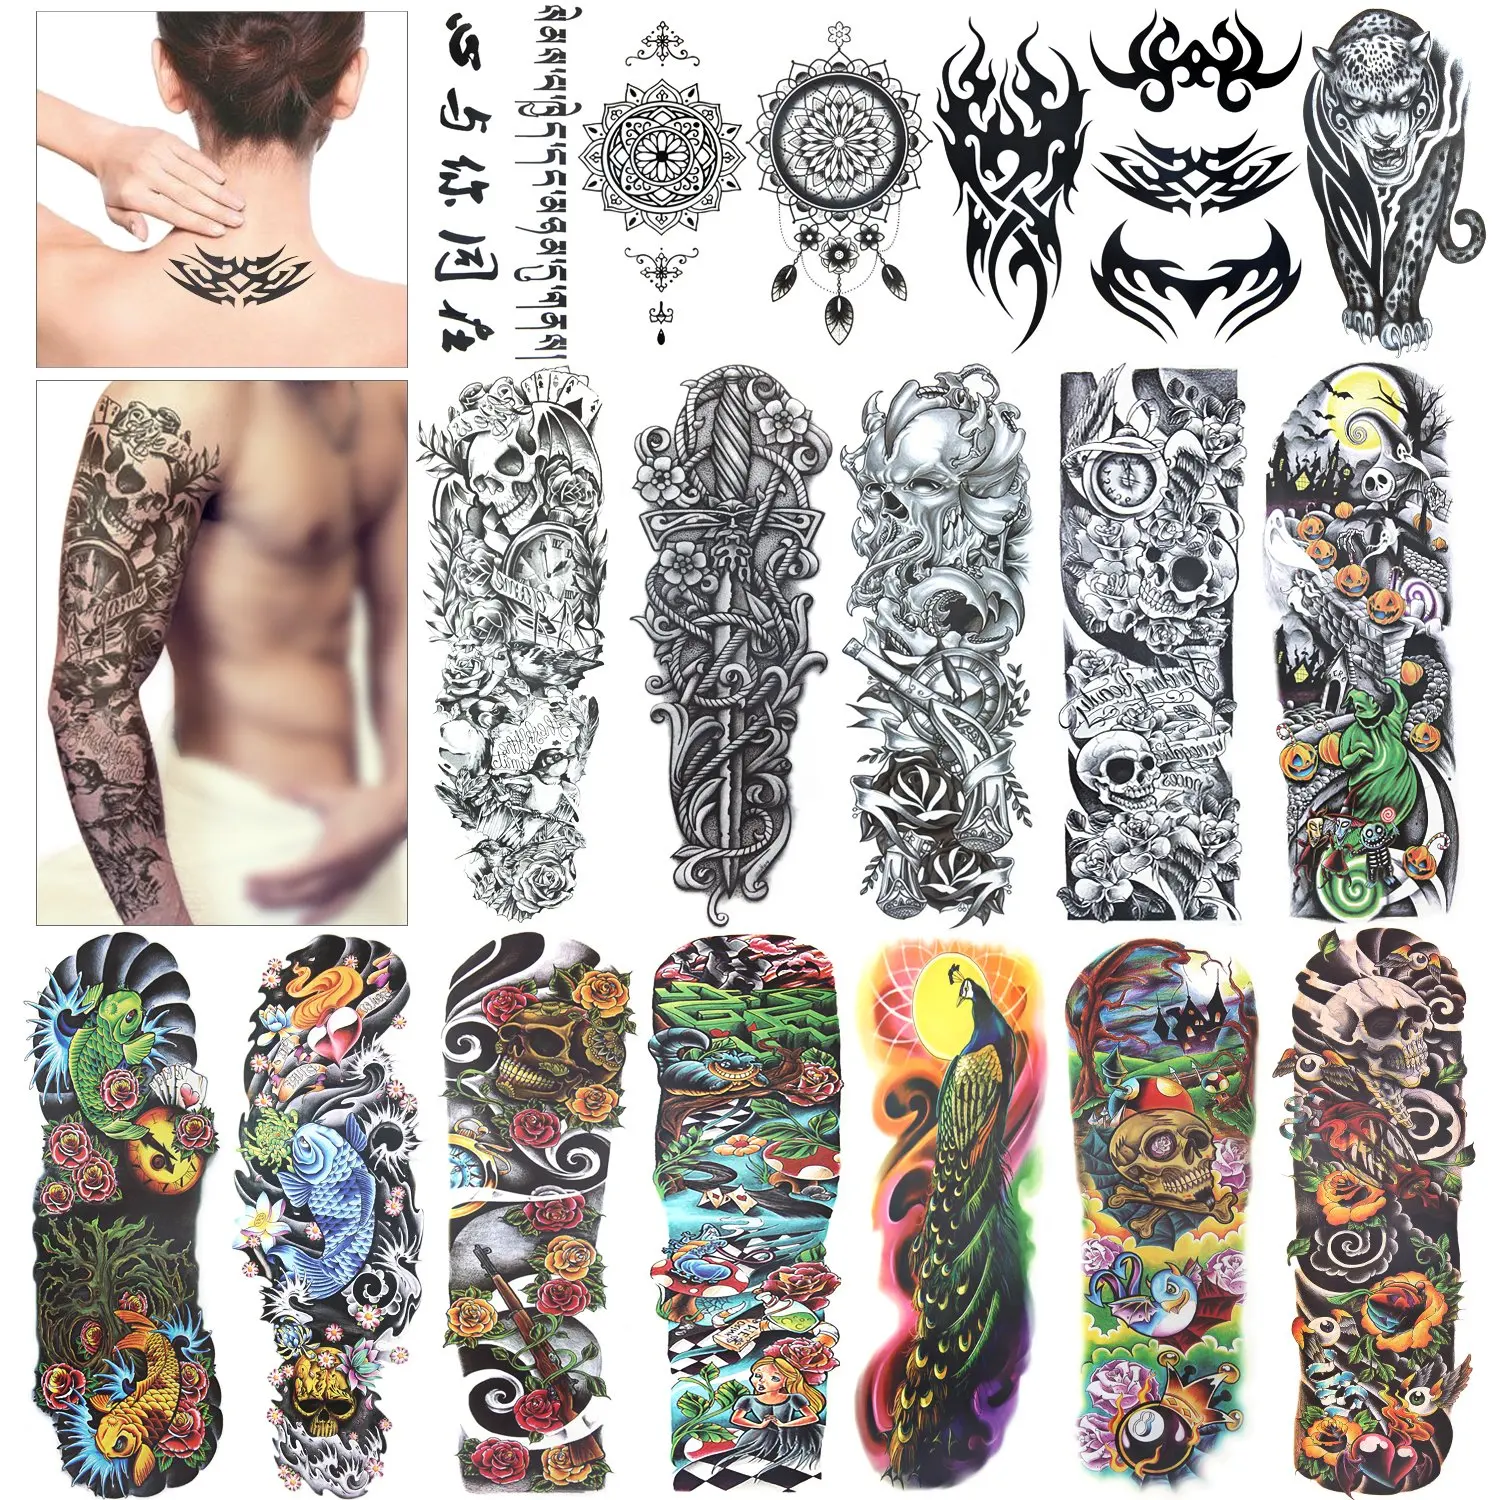 Buy Yazhiji 36 Sheets Temporary Tattoos Stickers 12 Sheets Fake Body Arm  Chest Shoulder Tattoos for Men or Women with 24 Sheets Tiny Black Online at  Lowest Price in Ubuy India B082X79RNS